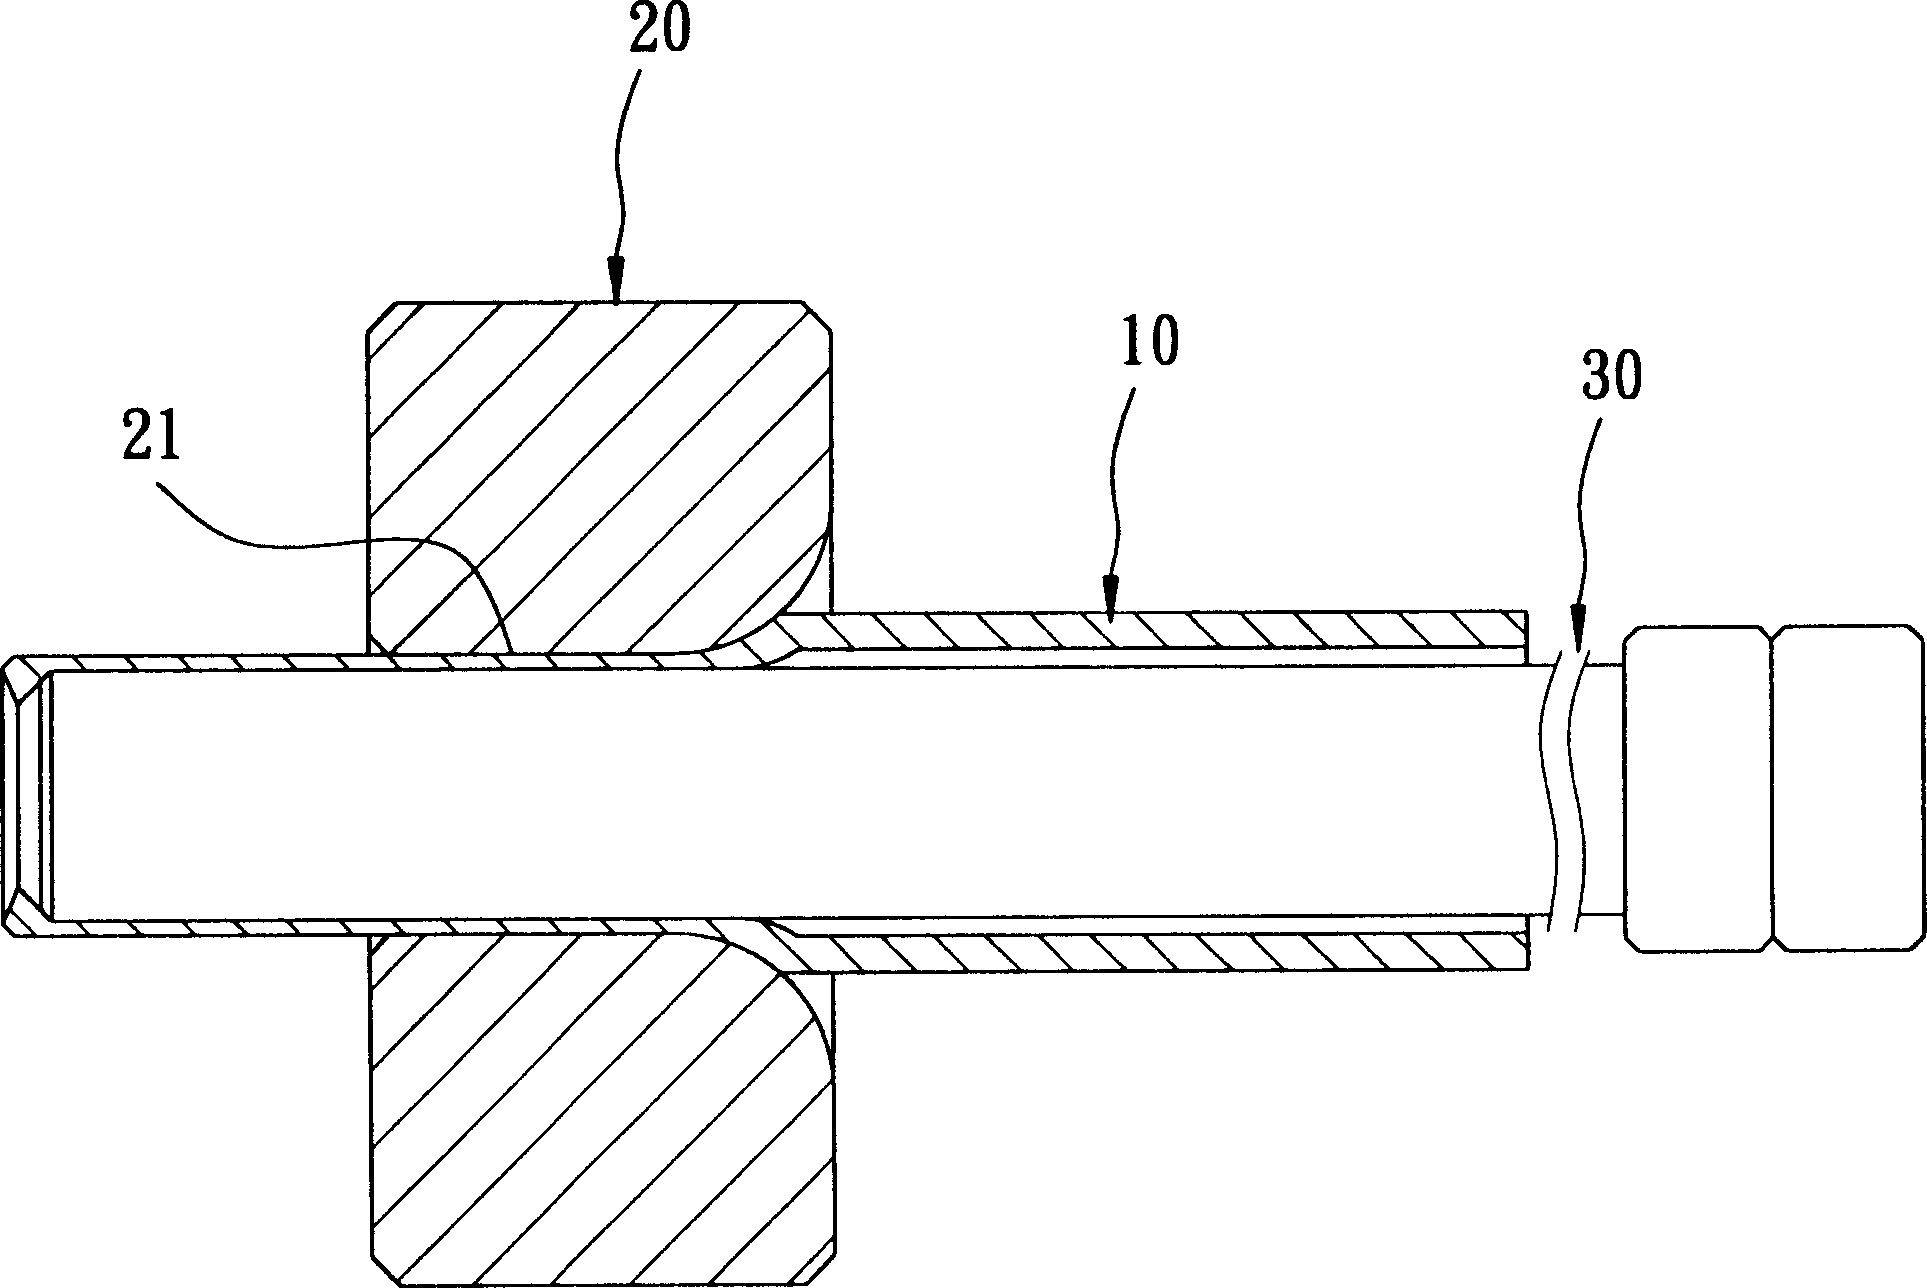 Method for producing aluminium by colol extrusion